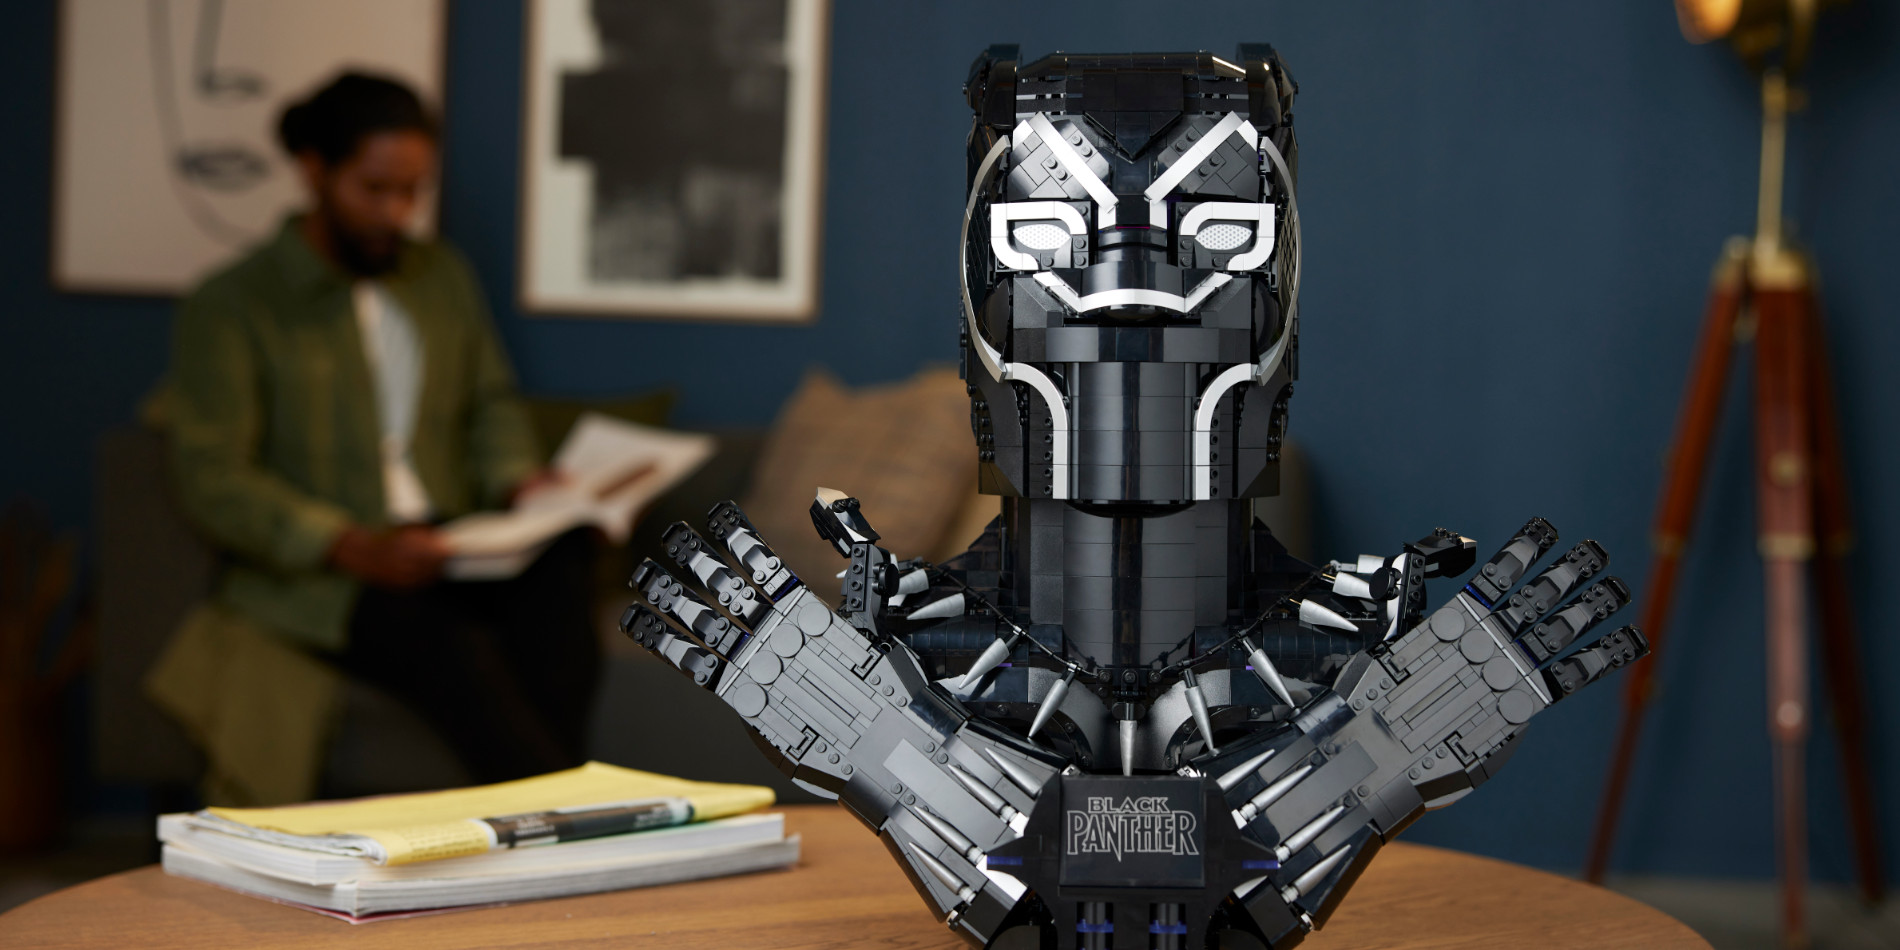 Lego Black Panther Bust